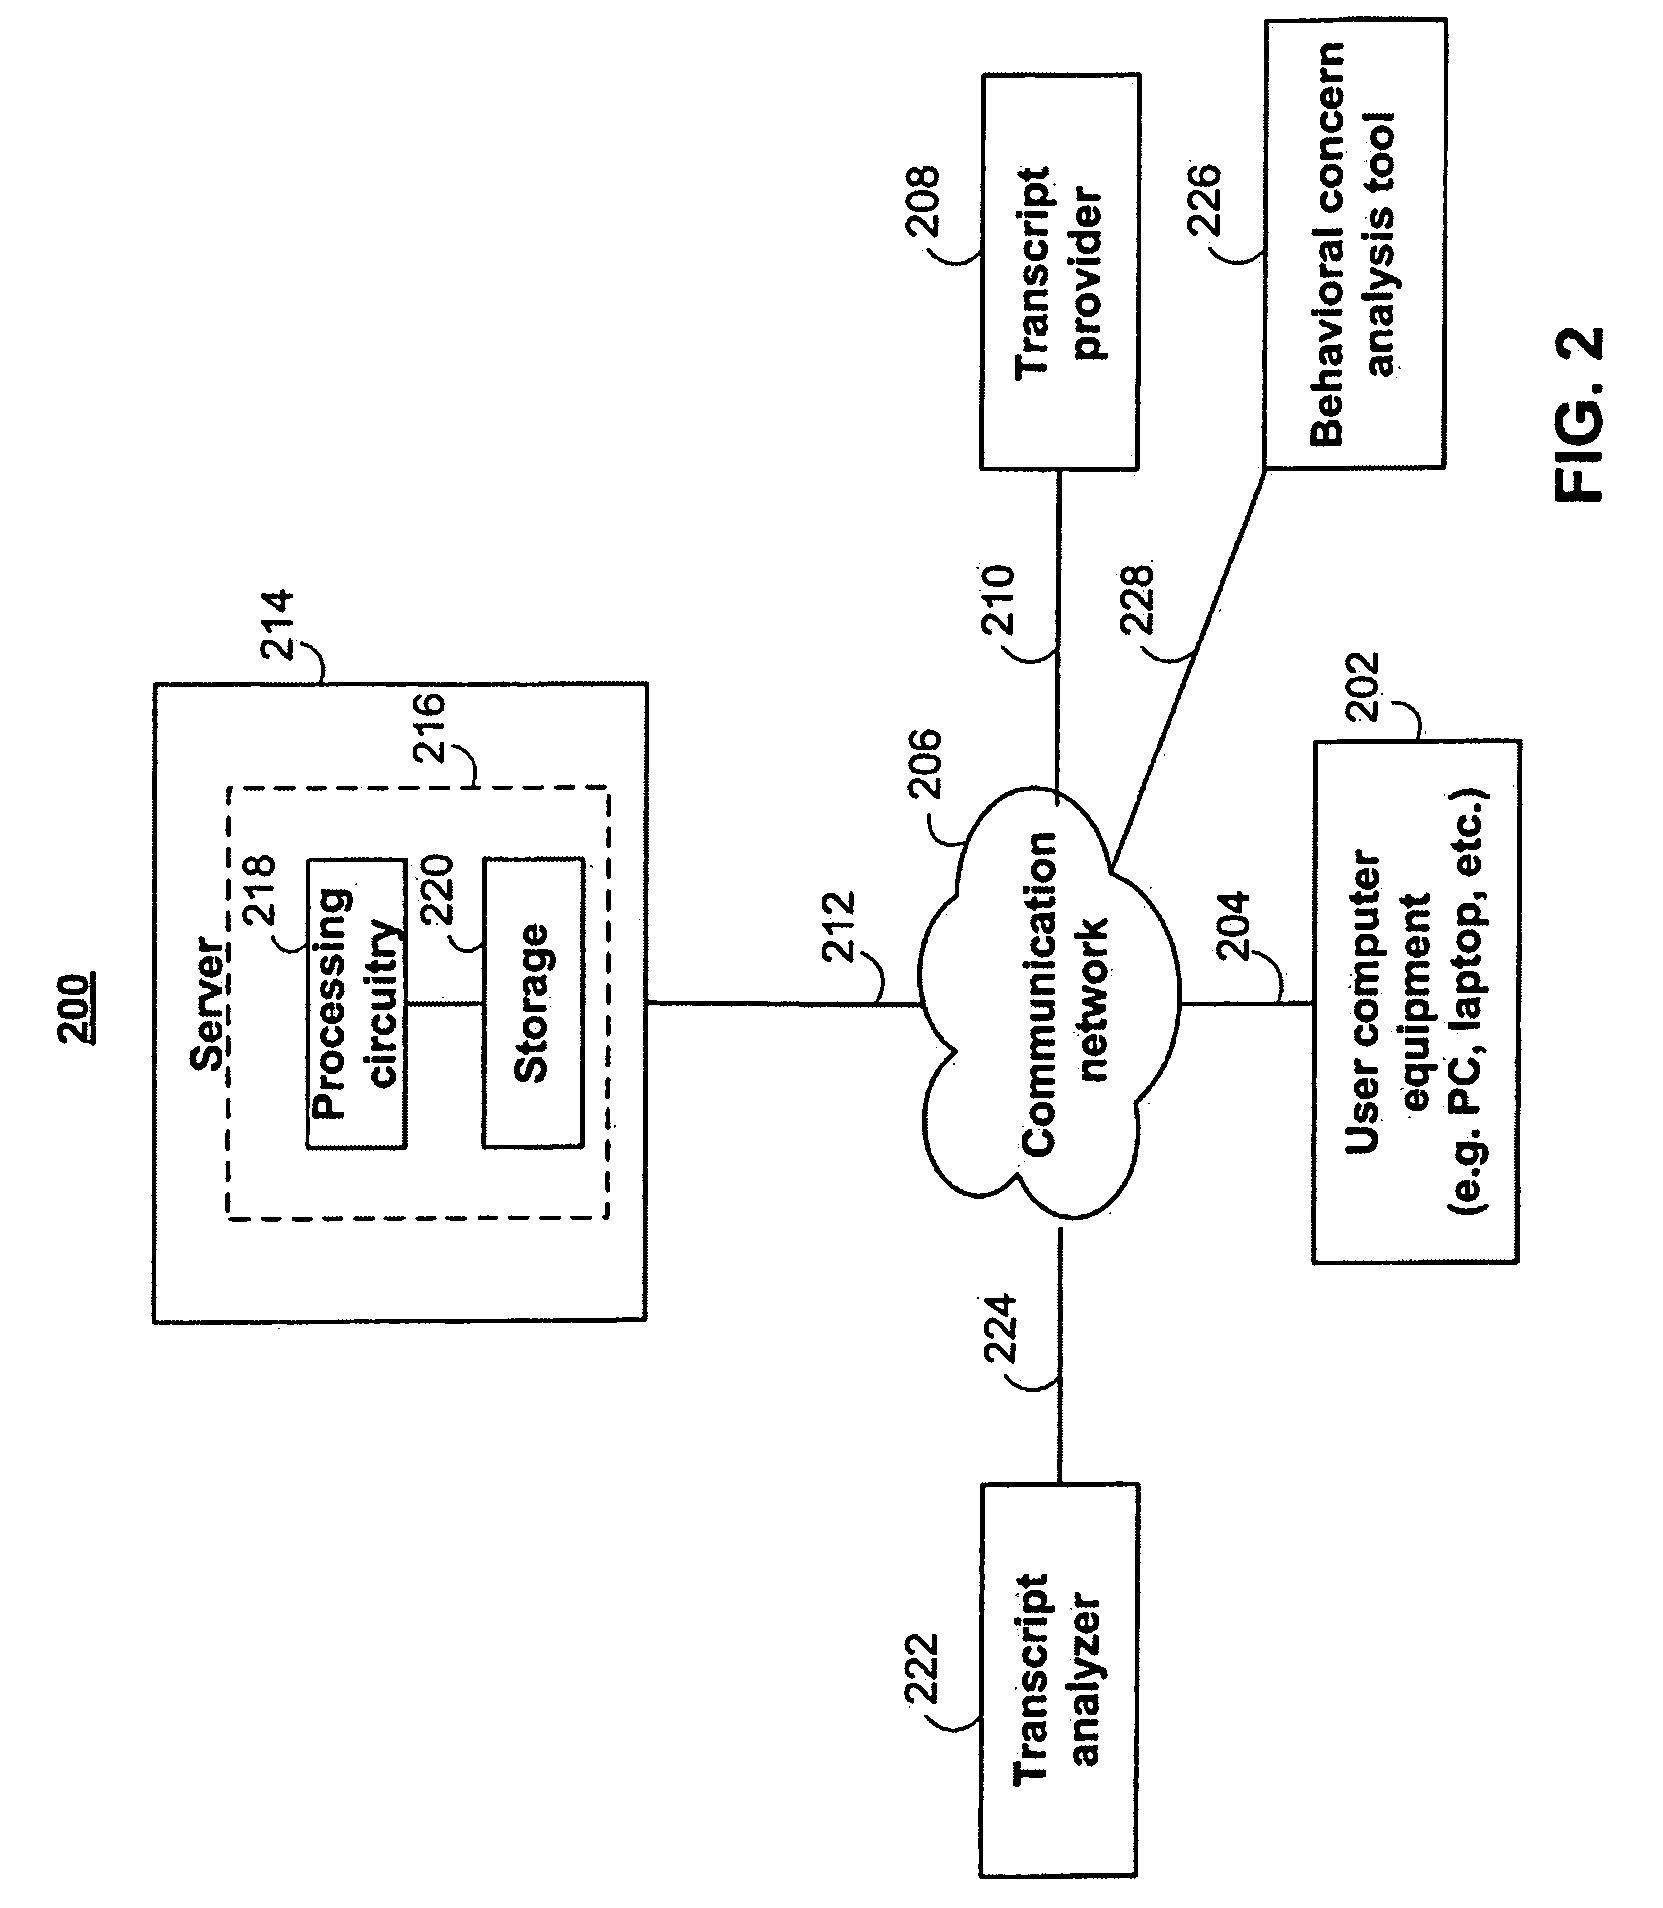 Systems and methods for determining the level of behavioral concern within a corporate disclosure and displaying the determination in a behavioral assessment matrix